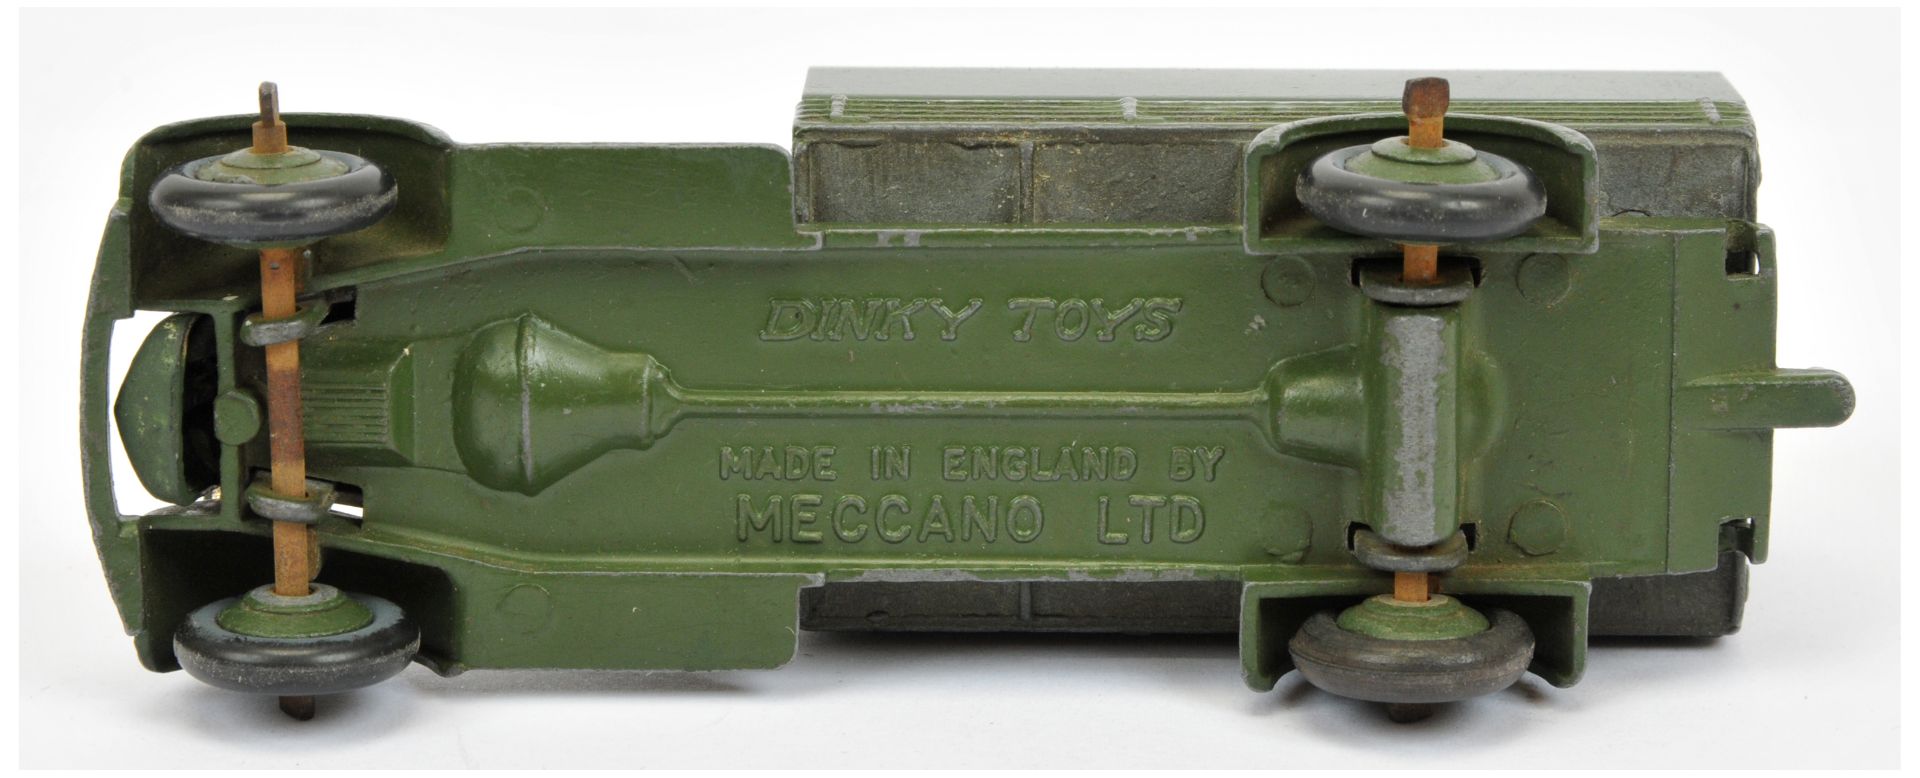 Dinky 25B South African Covered wagon - finished in military green - Image 3 of 3